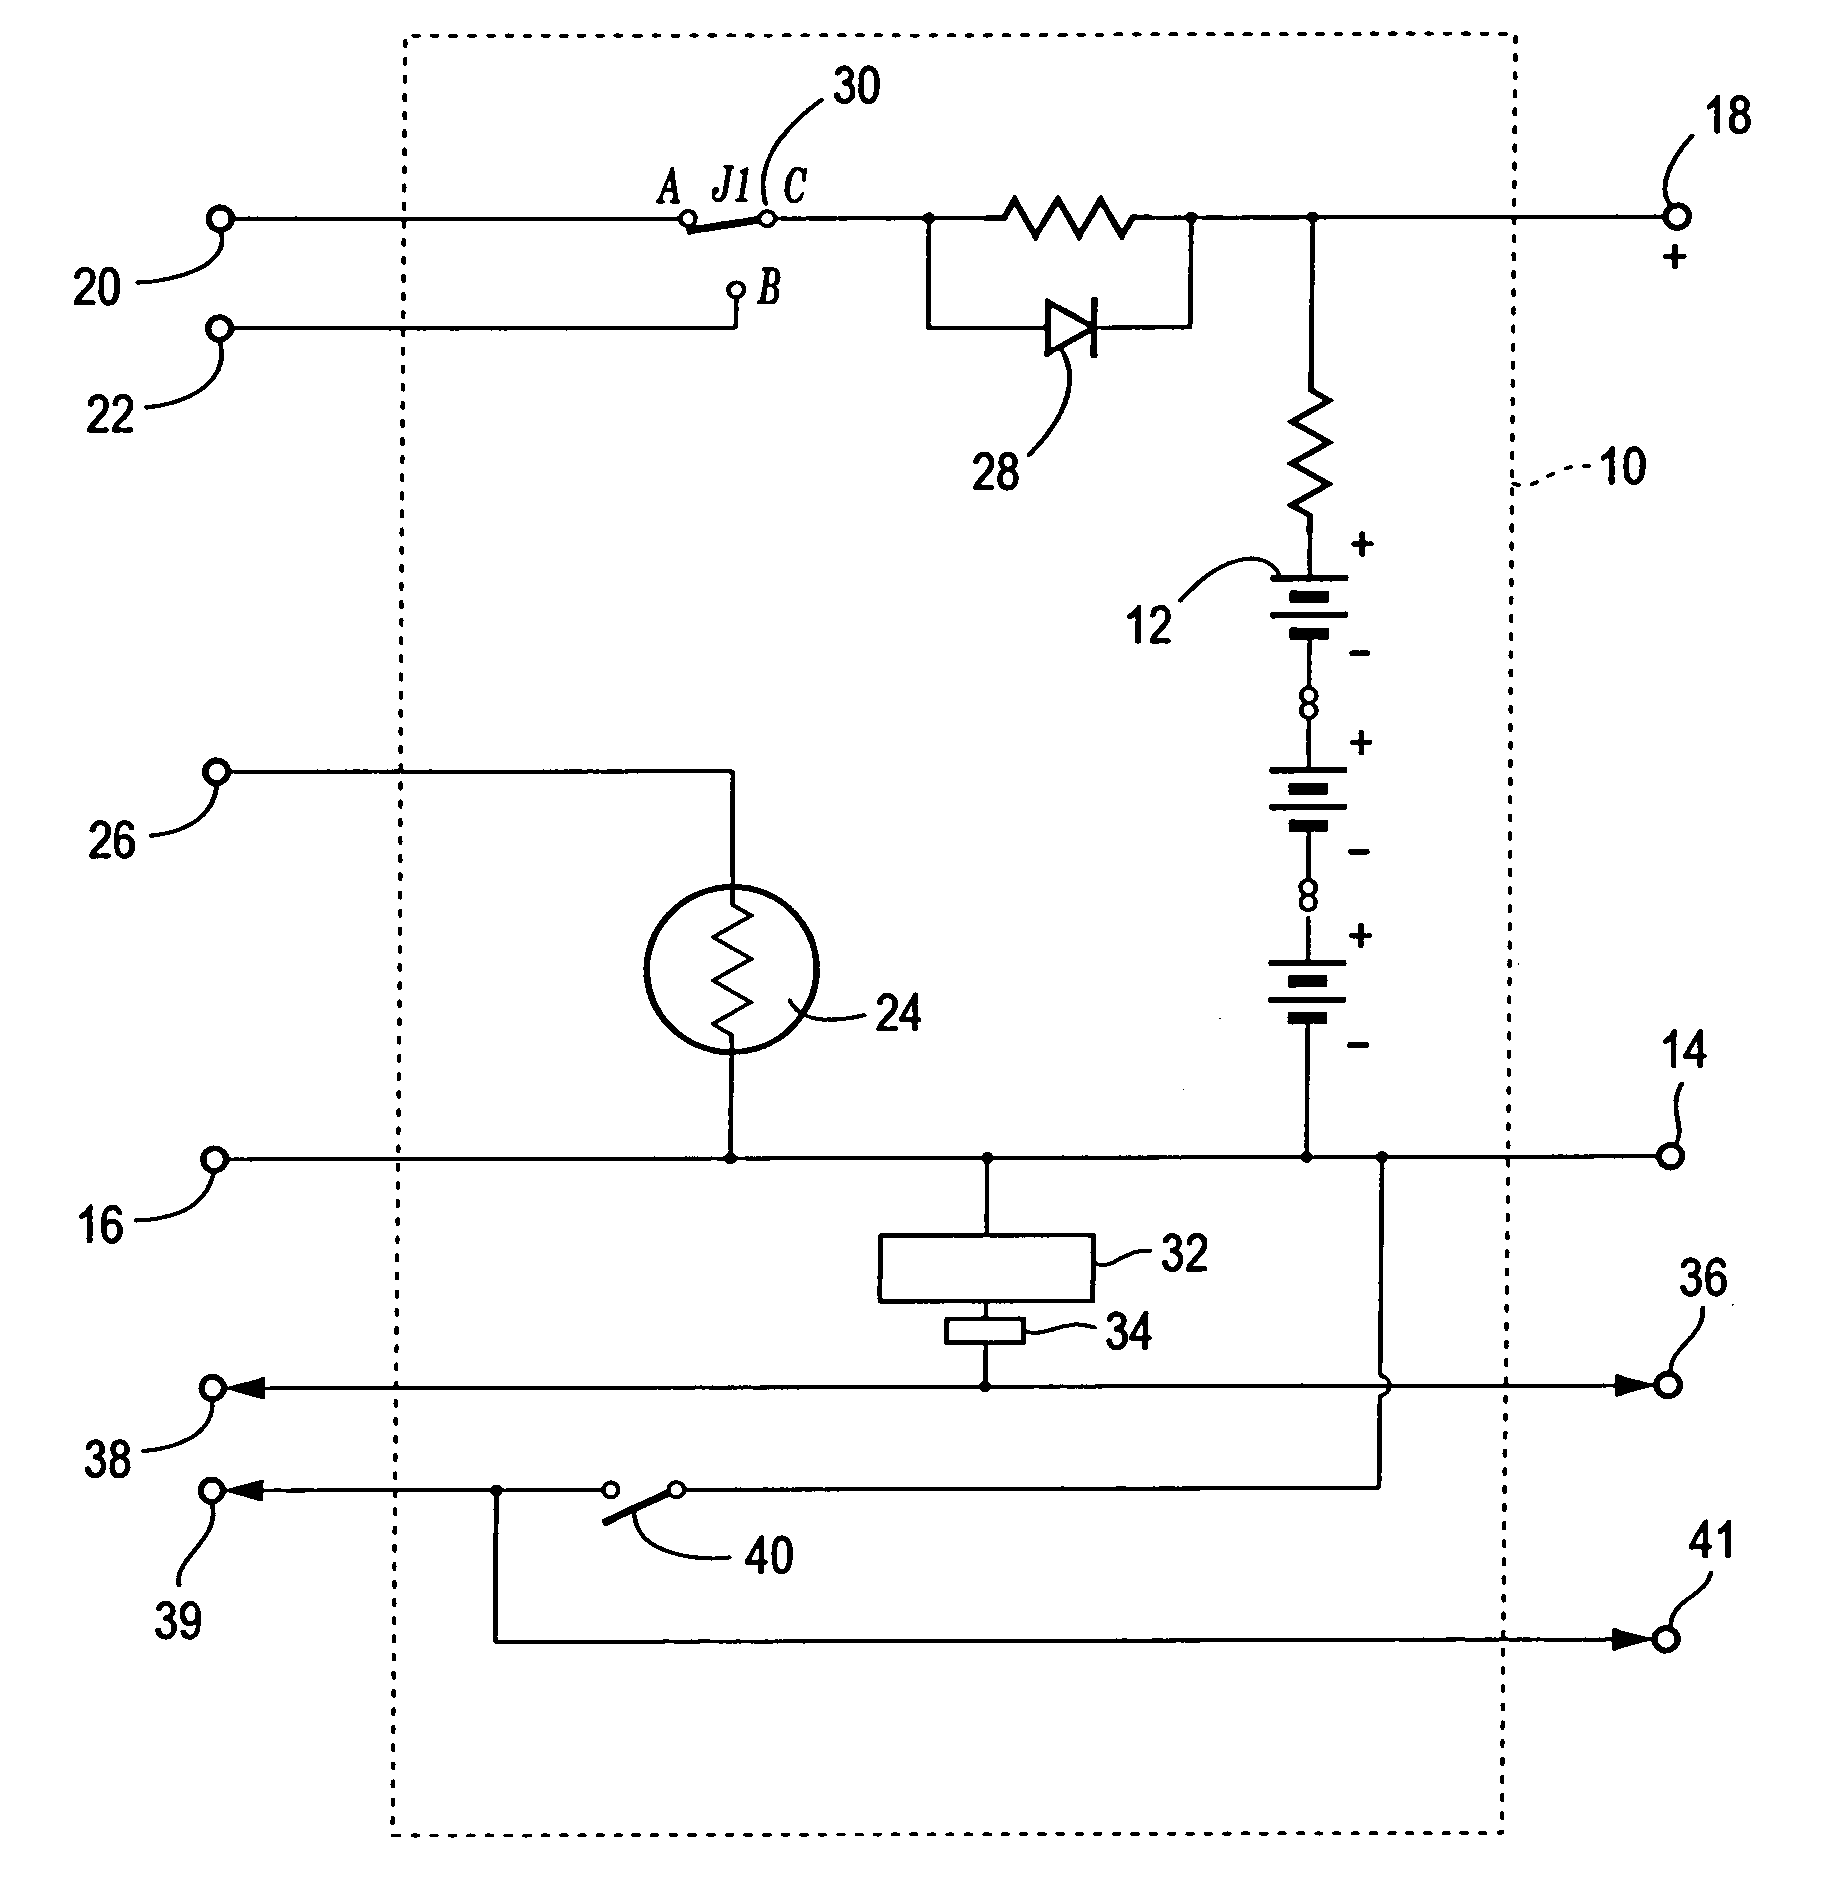 Battery with non-volatile memory for LMR portable radio applications